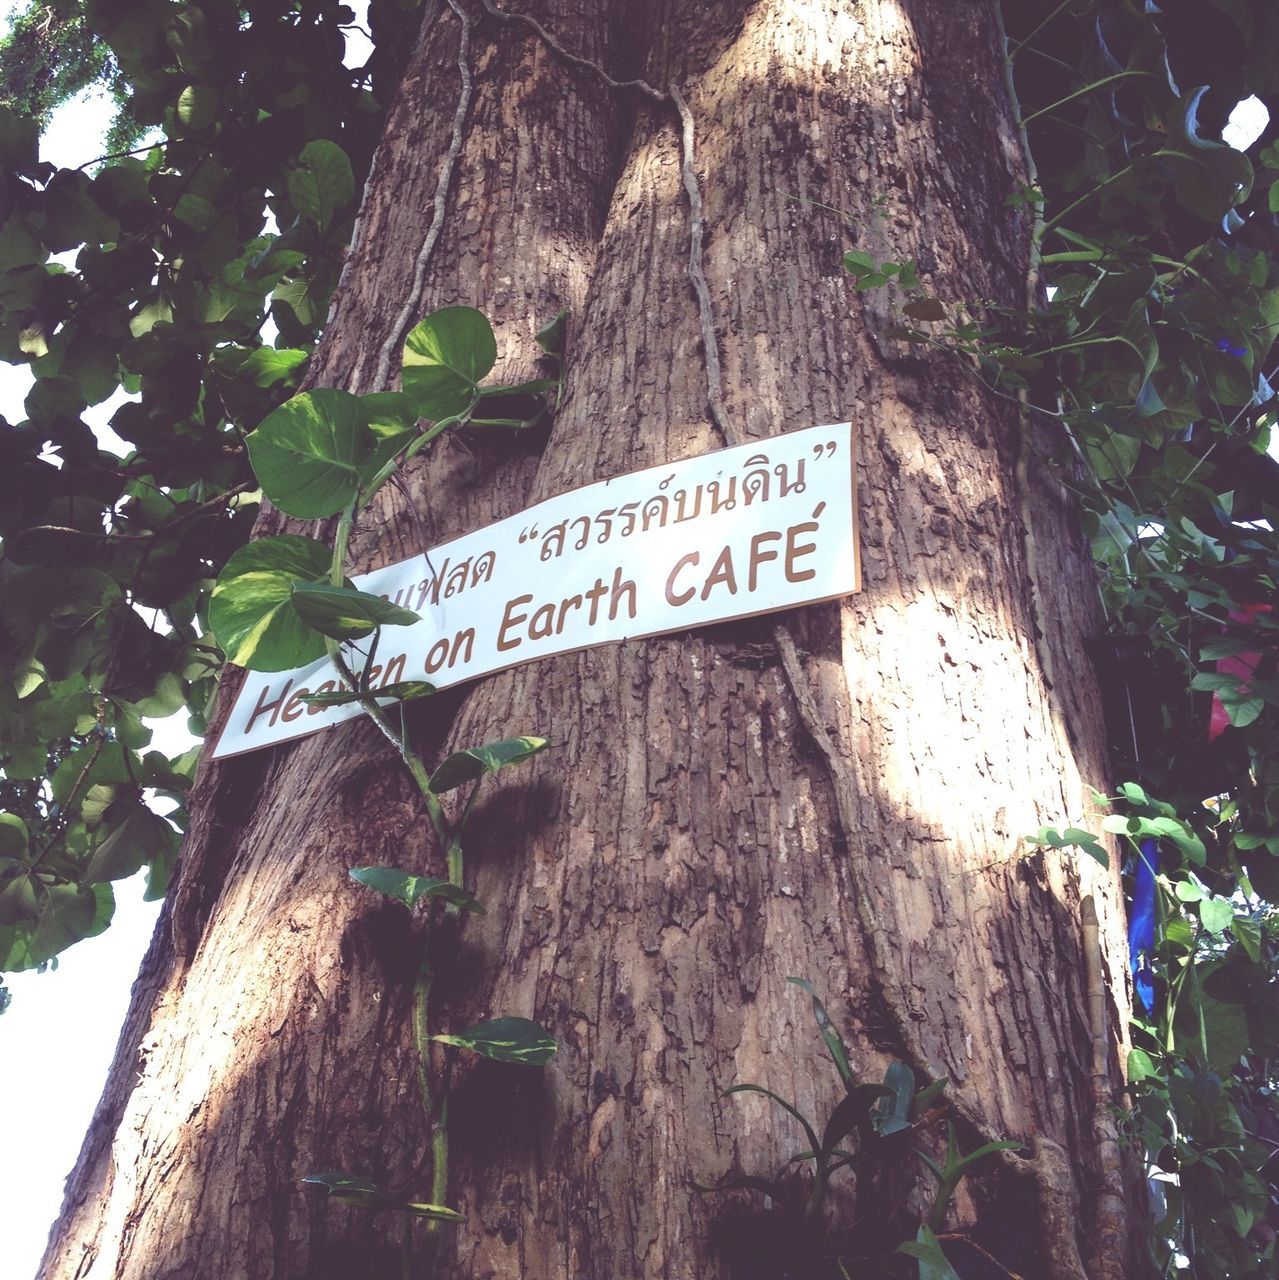 tree, low angle view, text, communication, growth, western script, tree trunk, branch, built structure, information sign, leaf, nature, outdoors, wood - material, day, no people, sunlight, sign, architecture, guidance